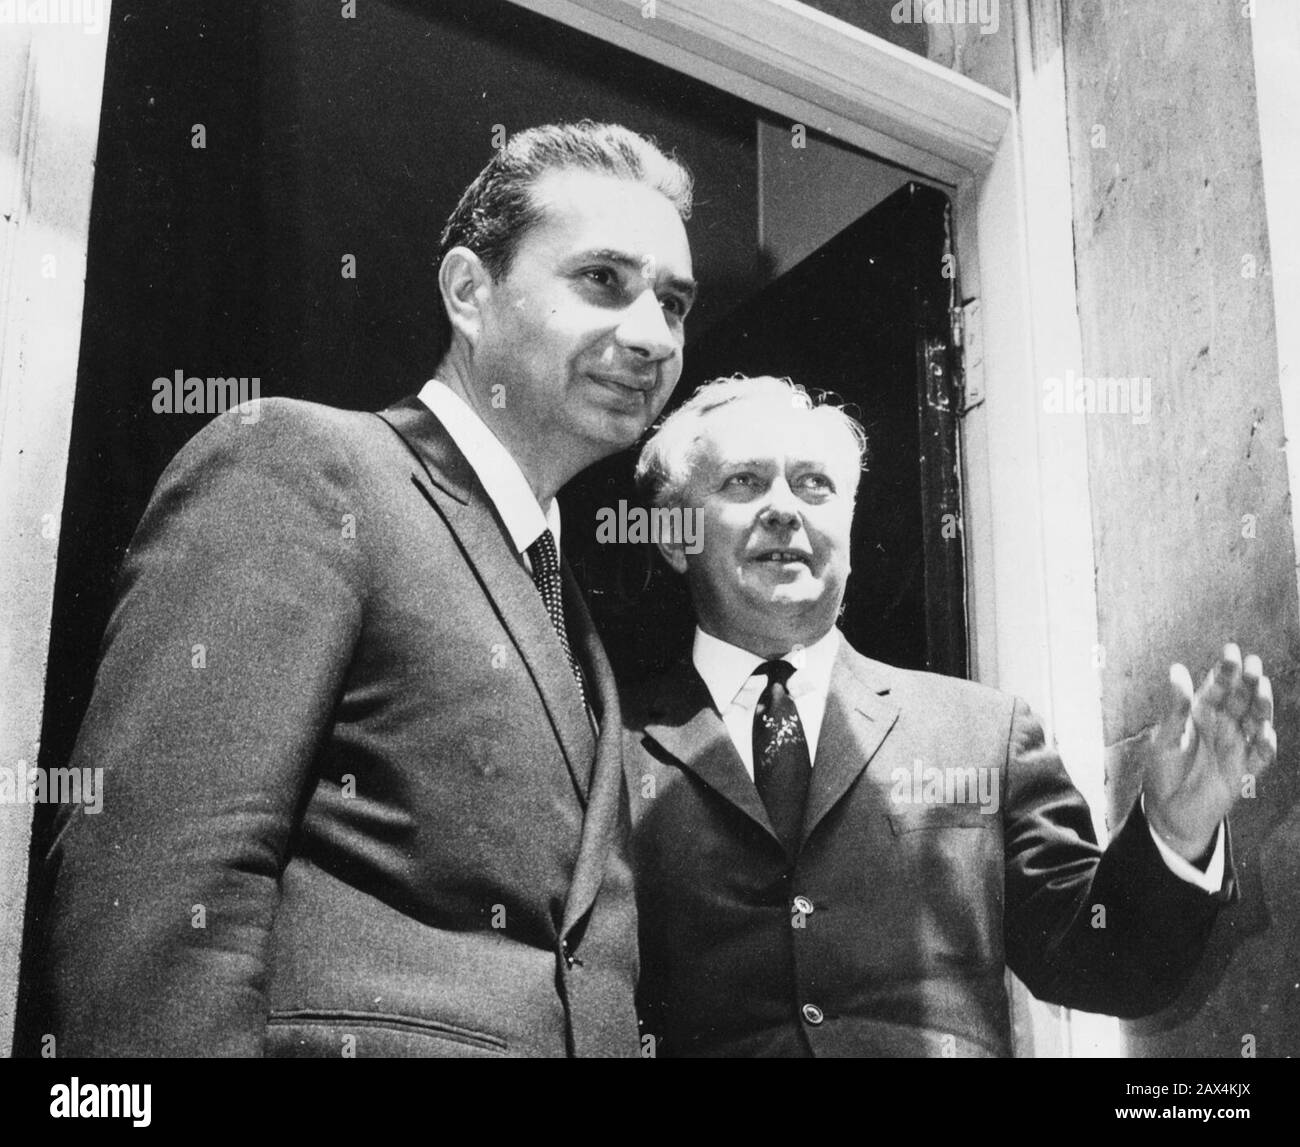 Page 3 - Aldo Moro High Resolution Stock and Images - Alamy